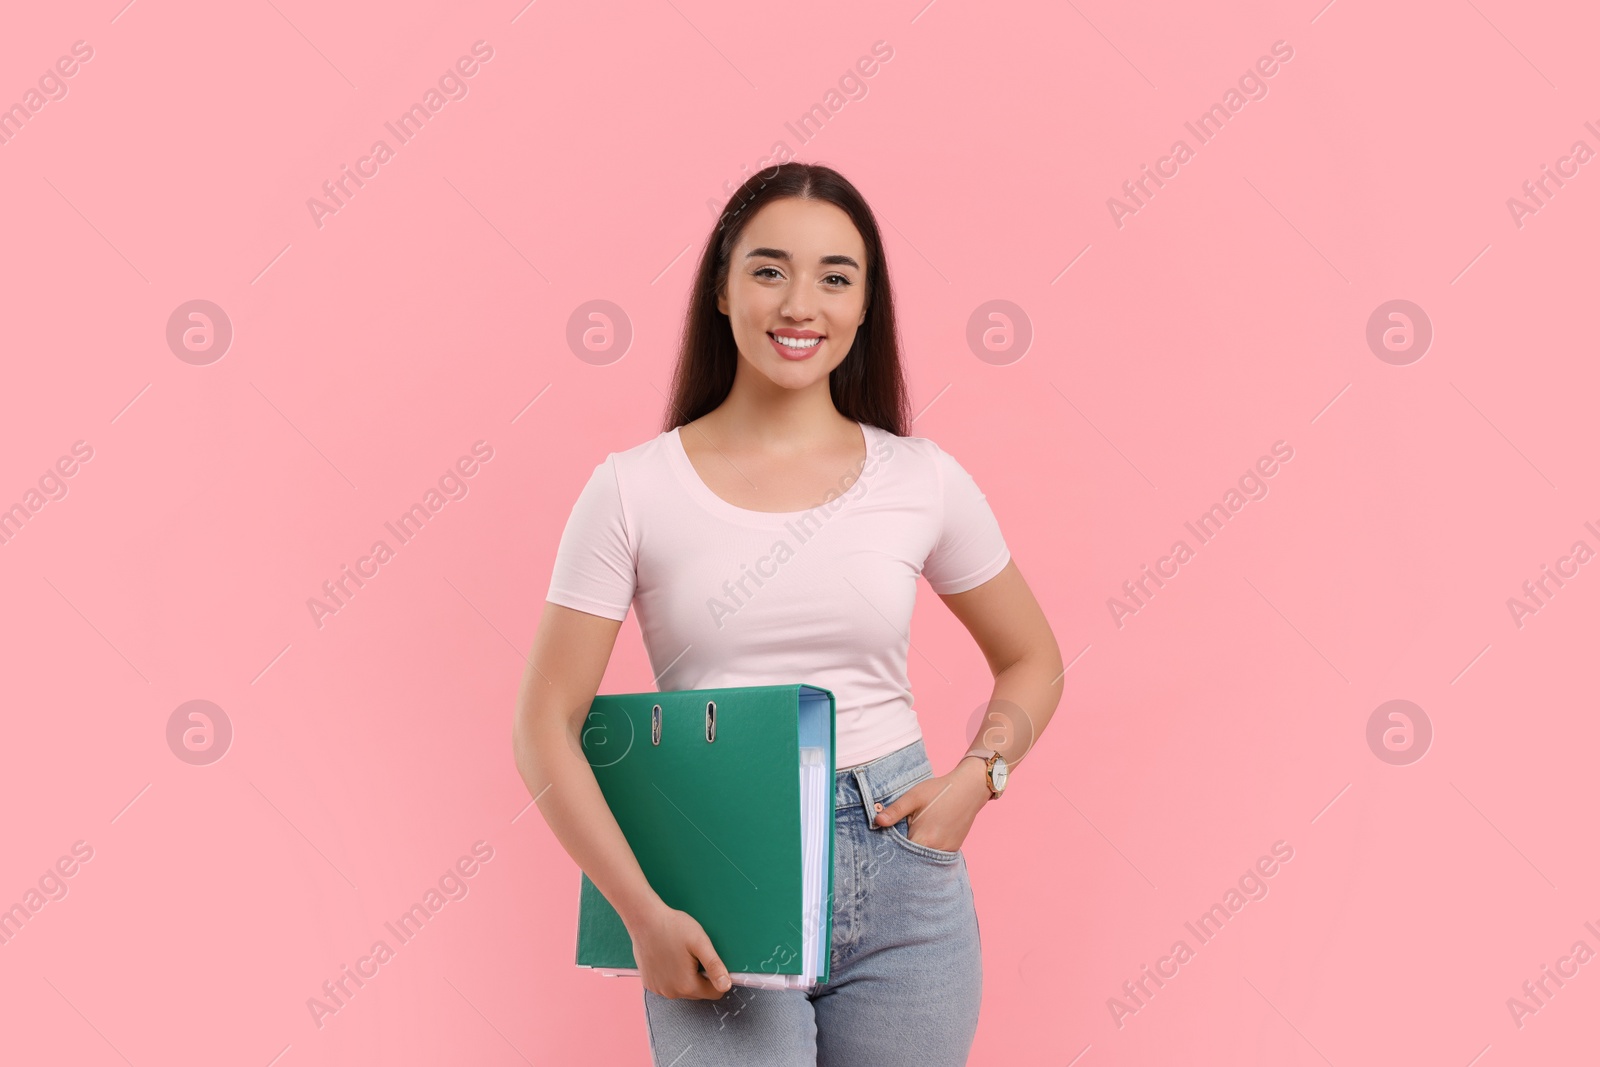 Photo of Happy woman with folder on pink background